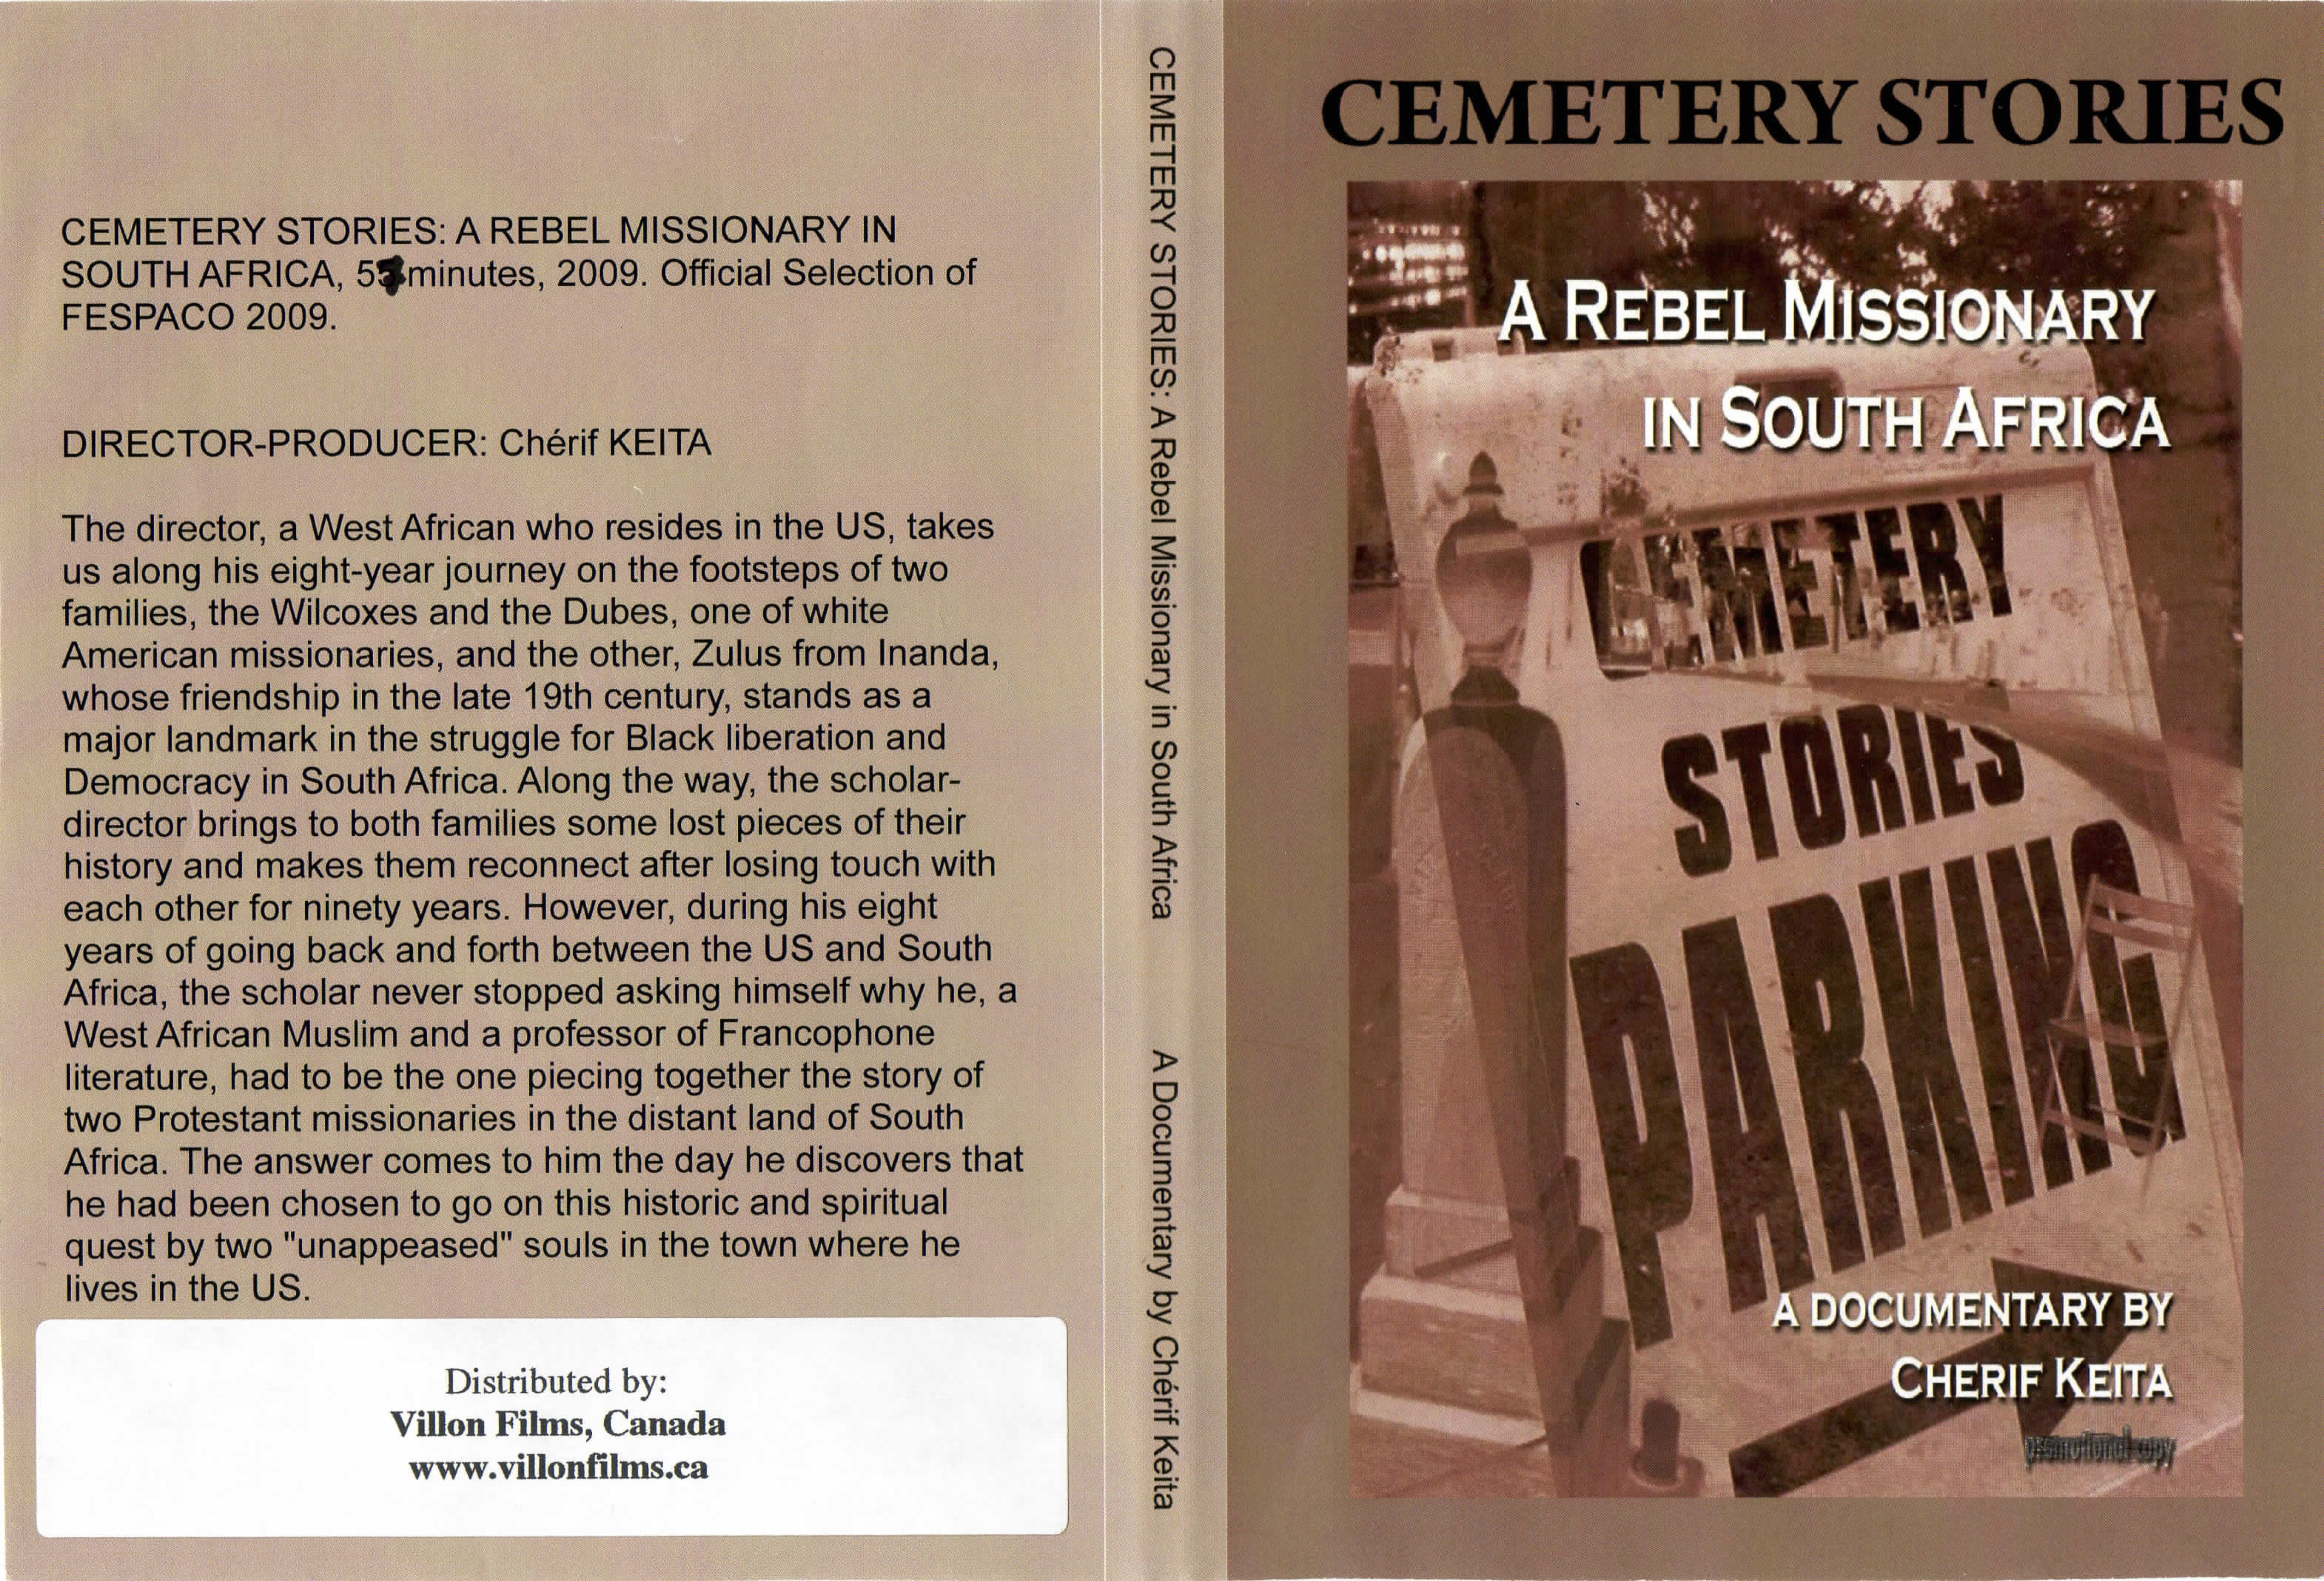 Cemetery Stories - A Rebel Missionary In South Africa - DVD Sleeve.